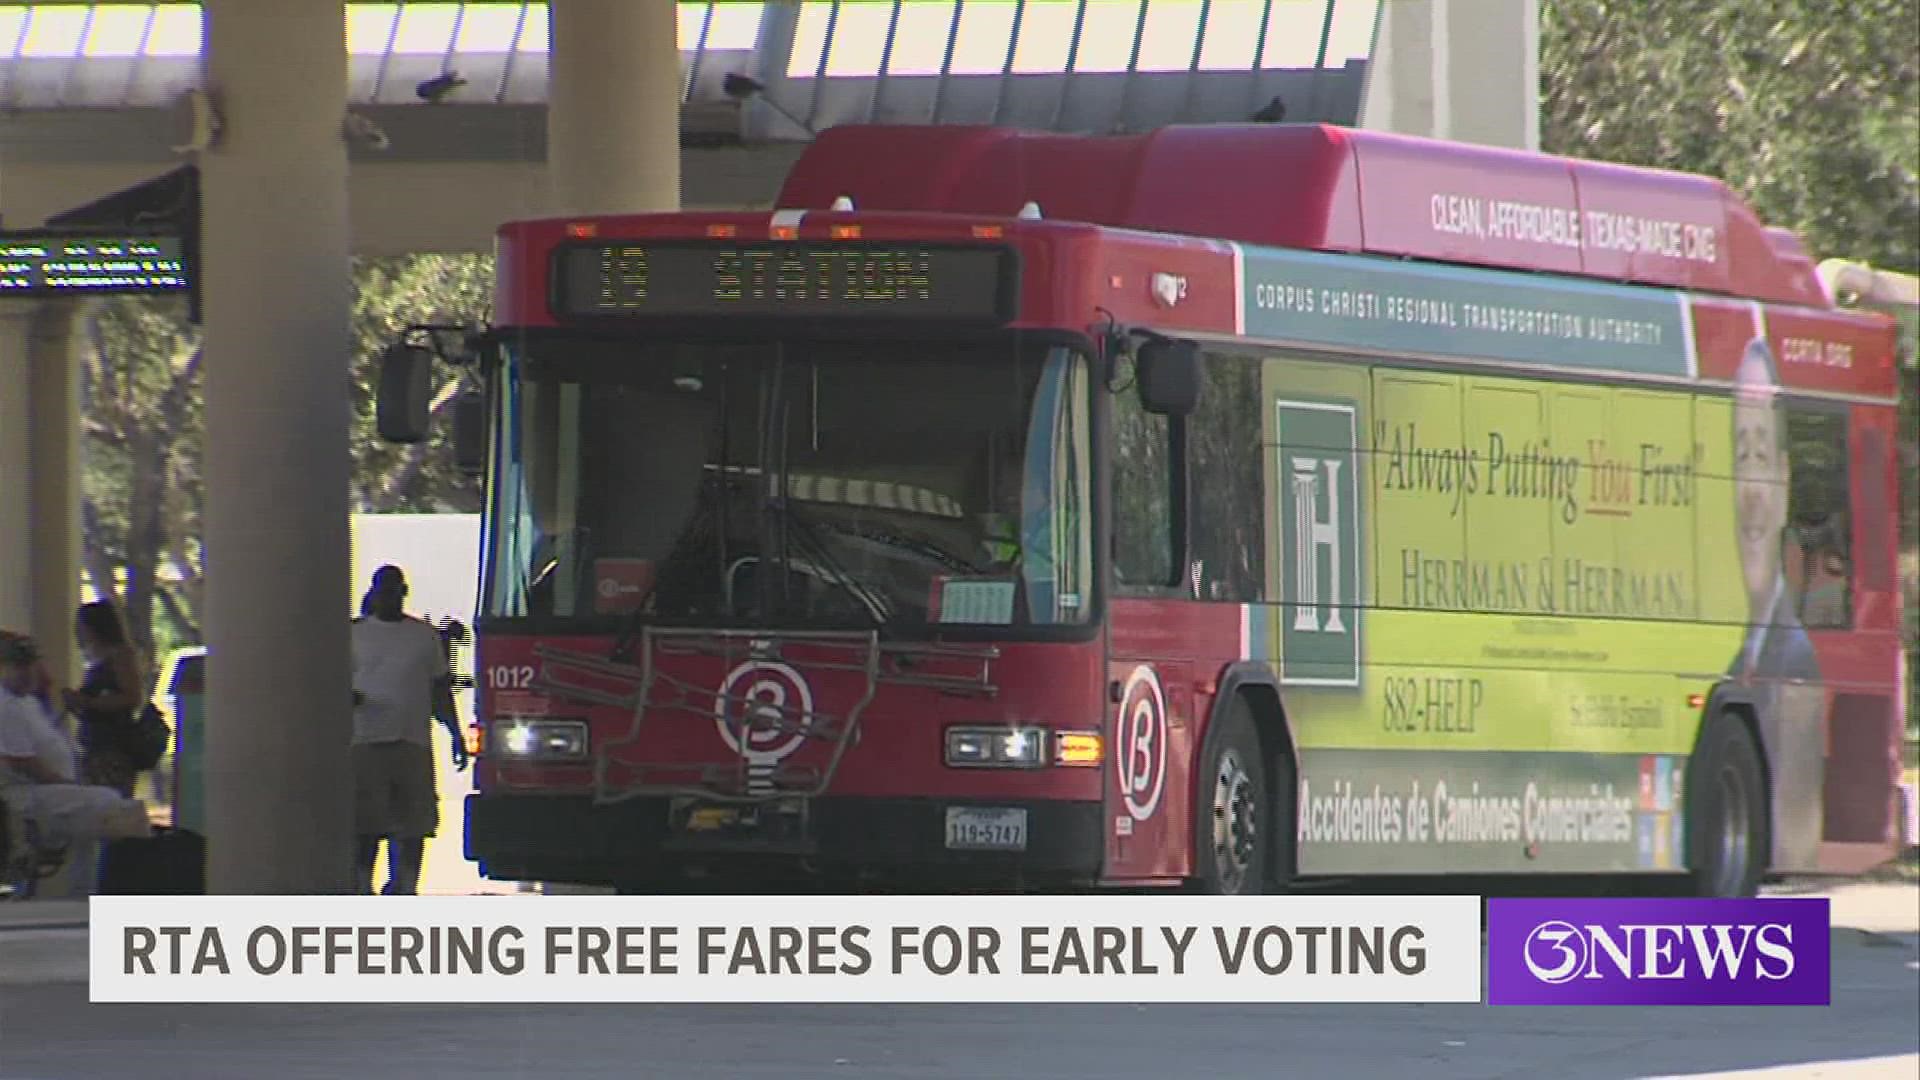 If residents plan on heading to the polls the RTA will give them a ride no questions asked.